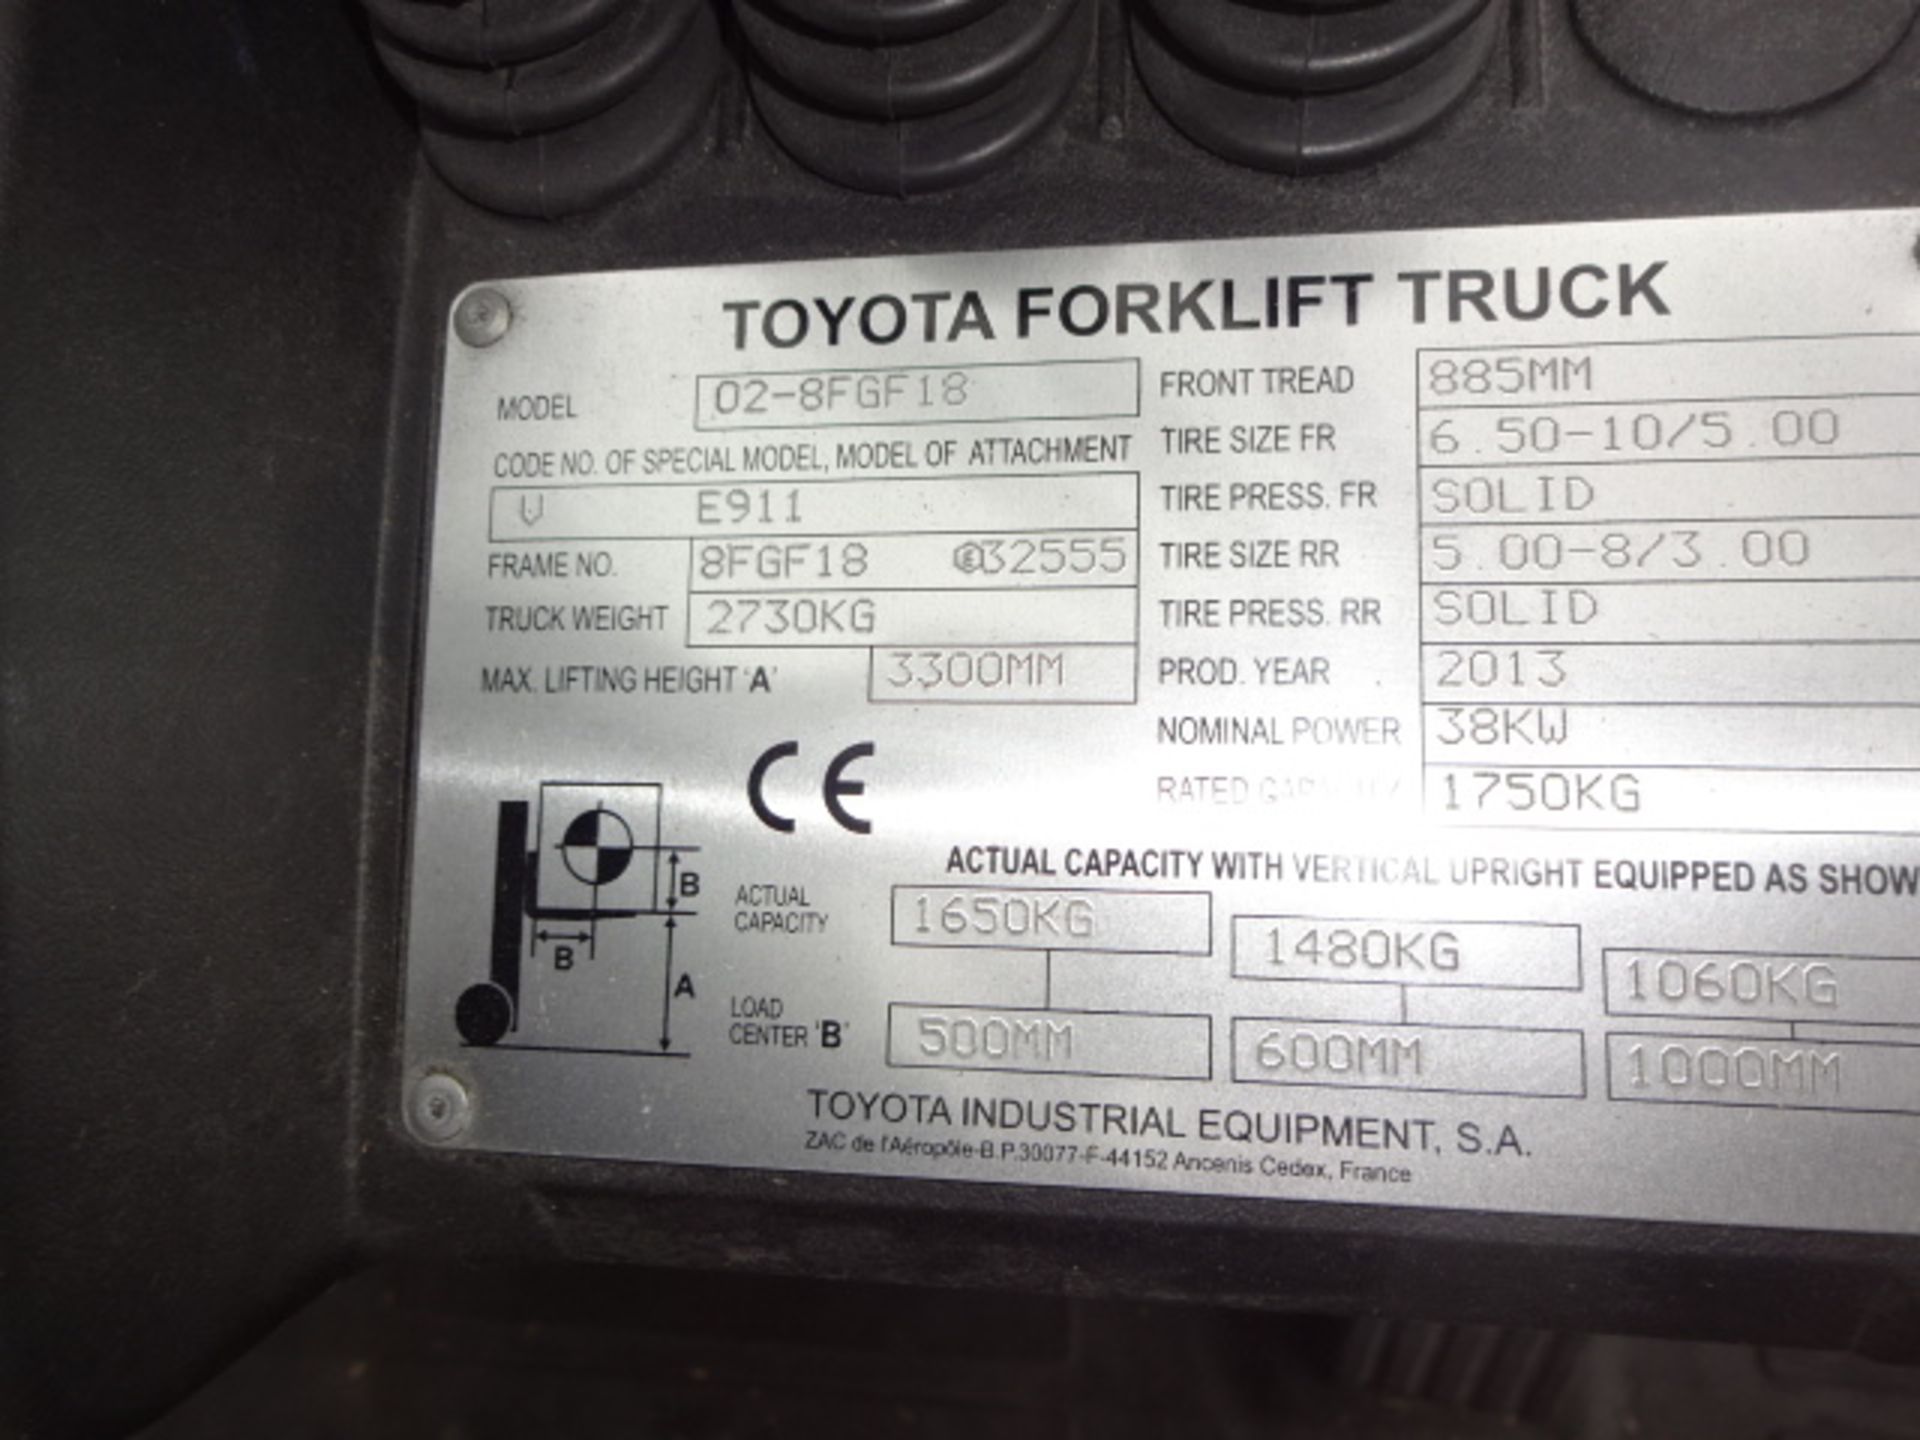 2013 TOYOTA 8-FGF18 1.8t gas driven forklift truck S/n: E32555 with duplex mast, side-shift & - Image 6 of 10